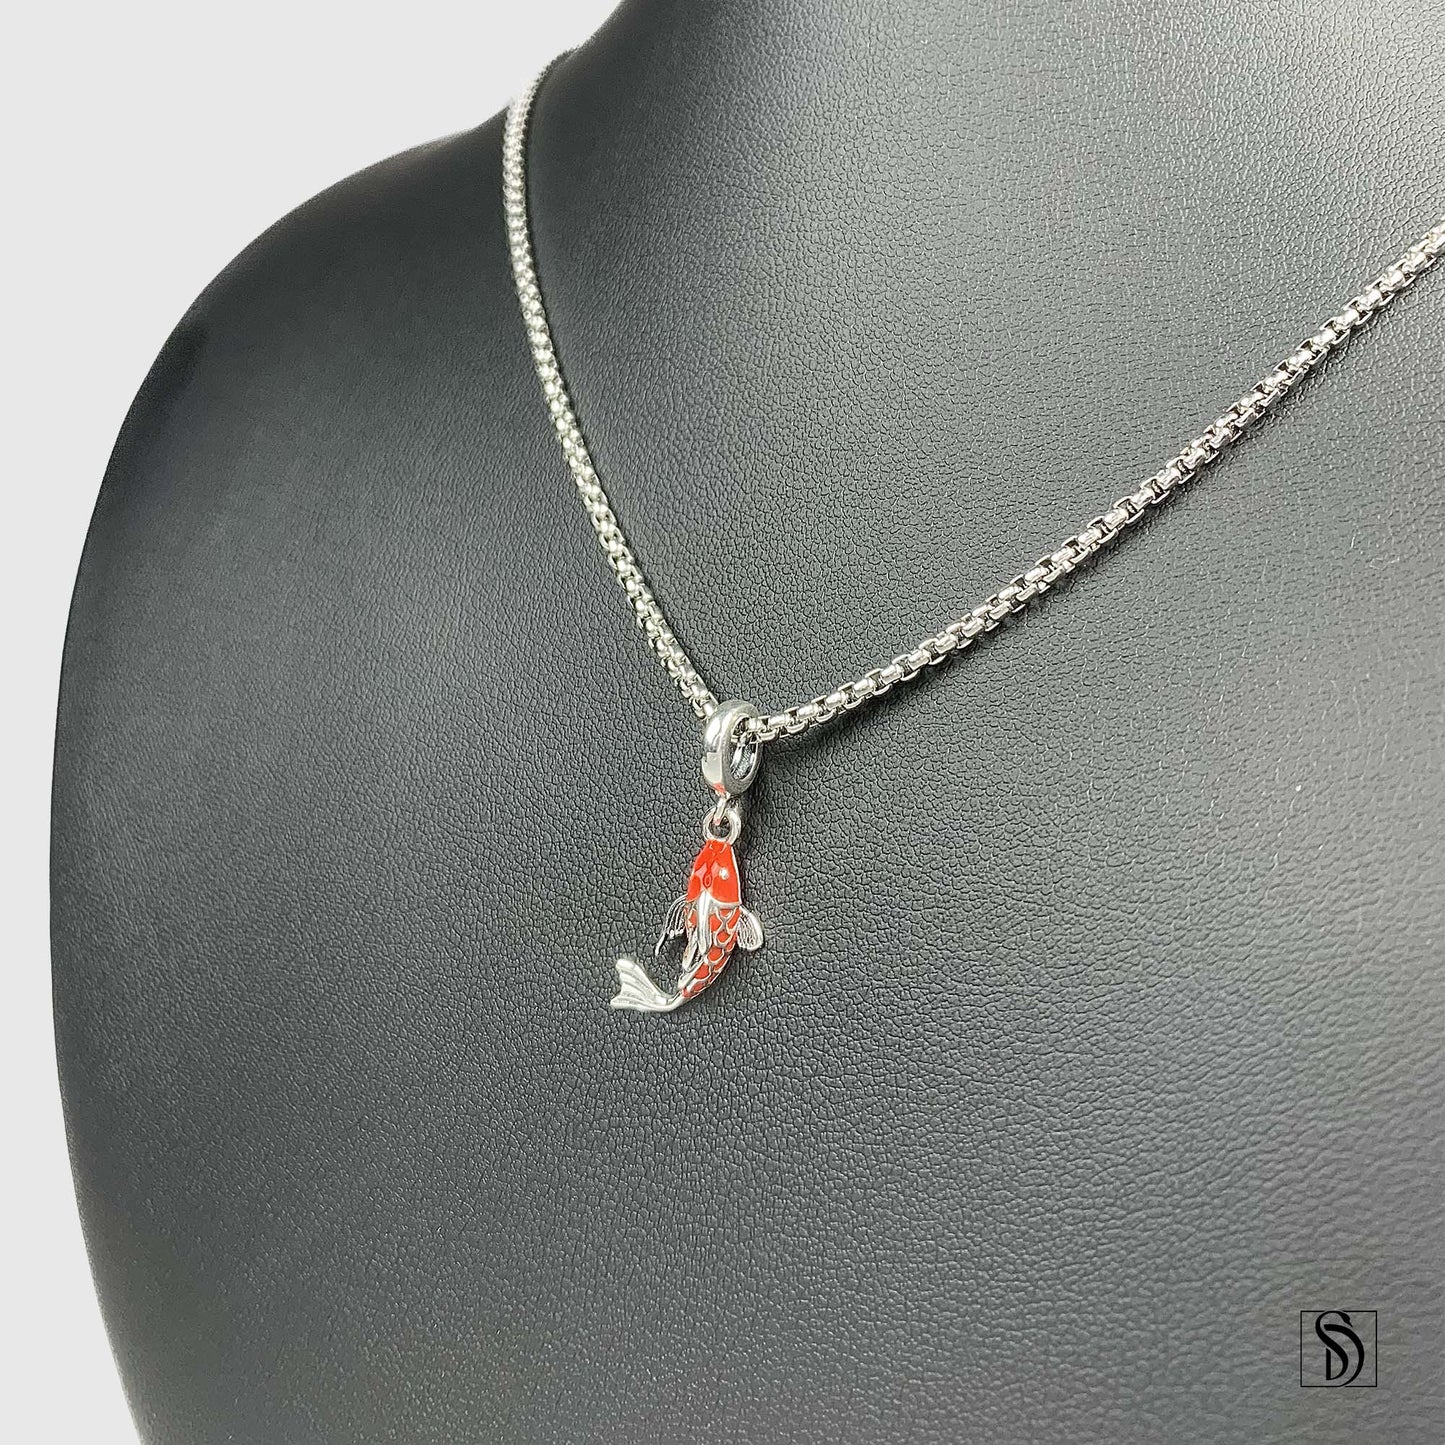 Lucky Japanese Koi Fish Necklace